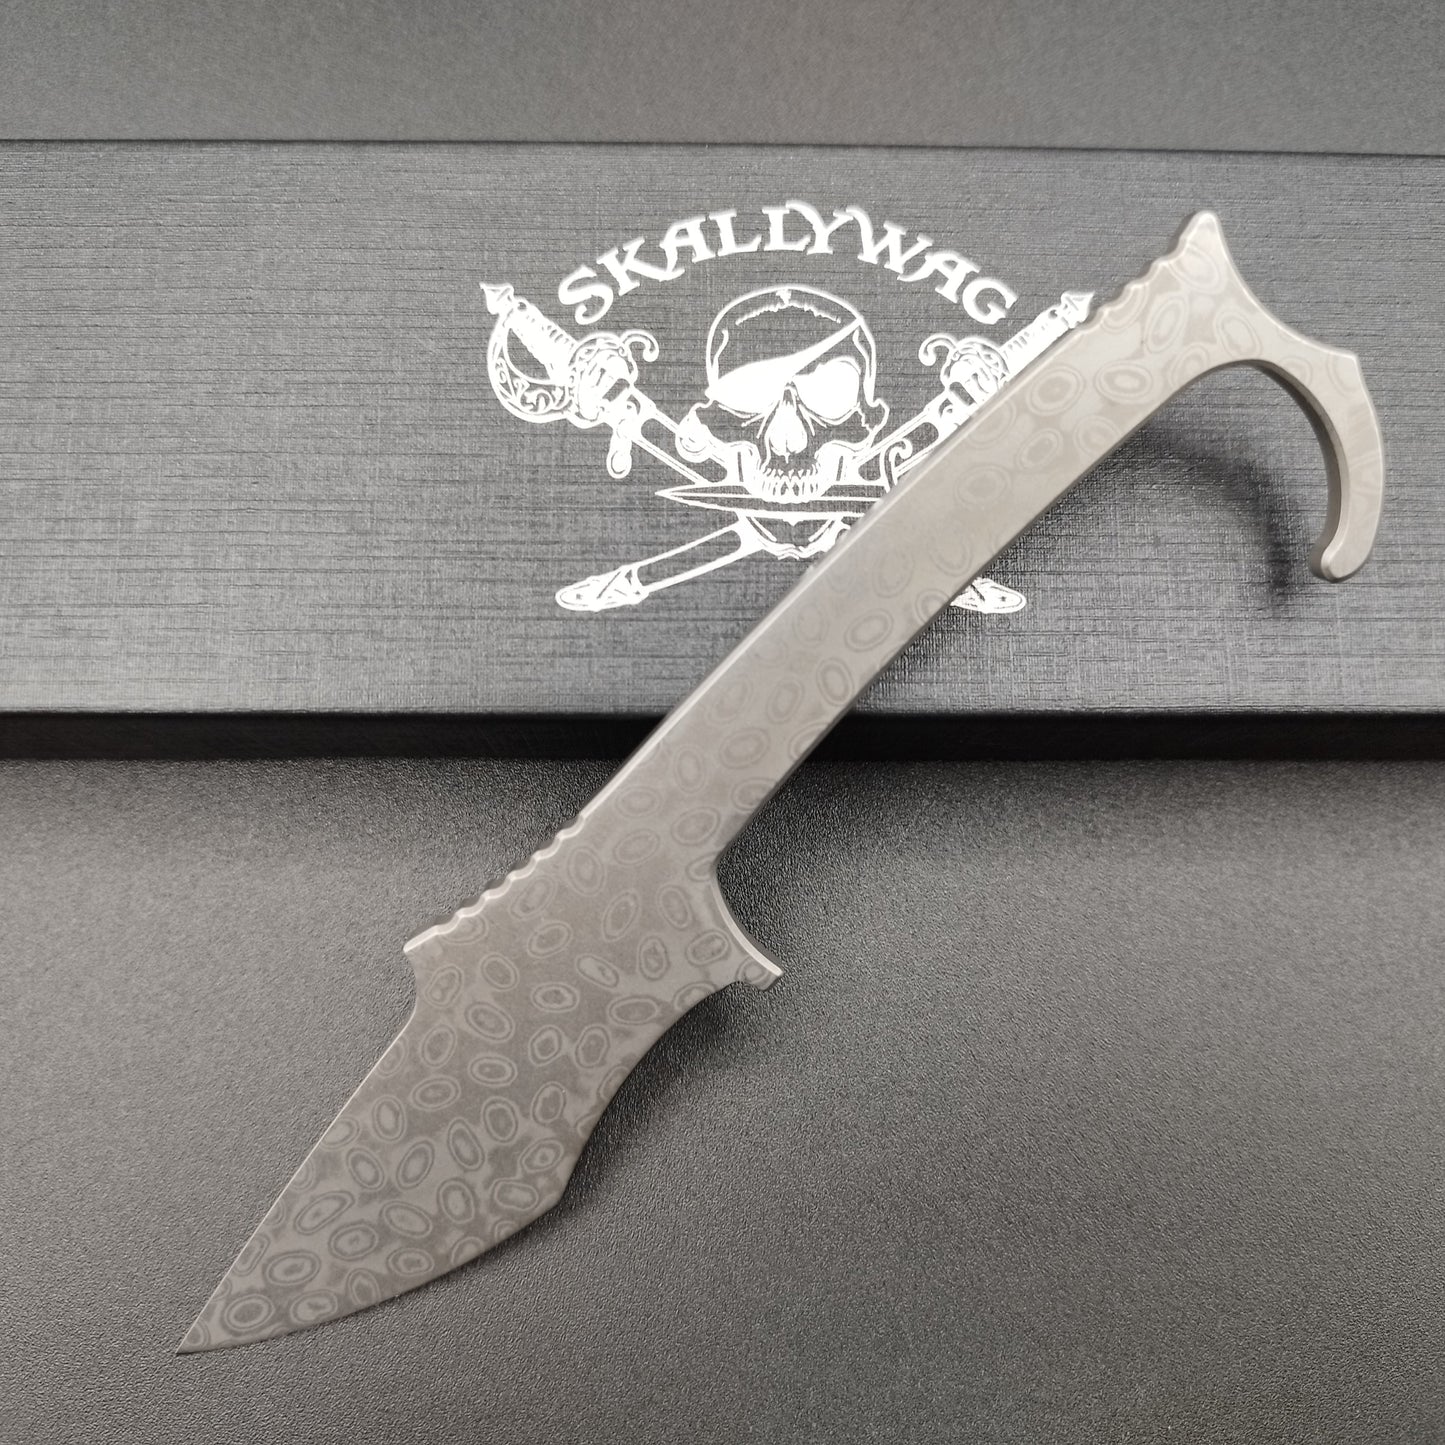 Skallywag Tactical MDV PLUS ONE Damascus mit Trainer